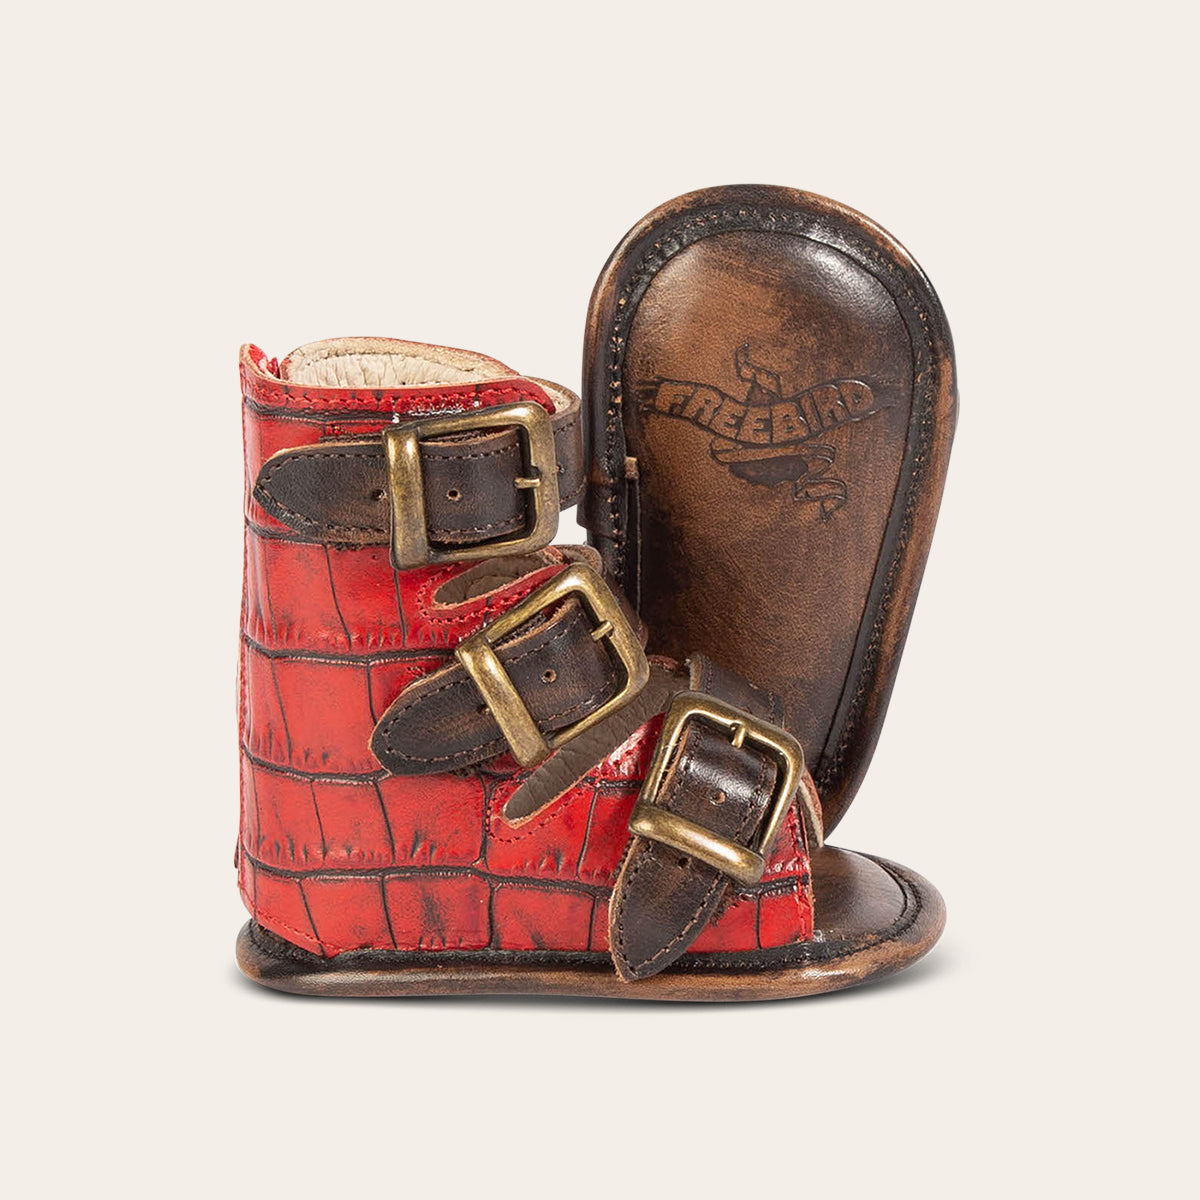 side view showing buckle fashion straps and soft leather imprinted sole on FREEBIRD infant baby bond red croco sandal 